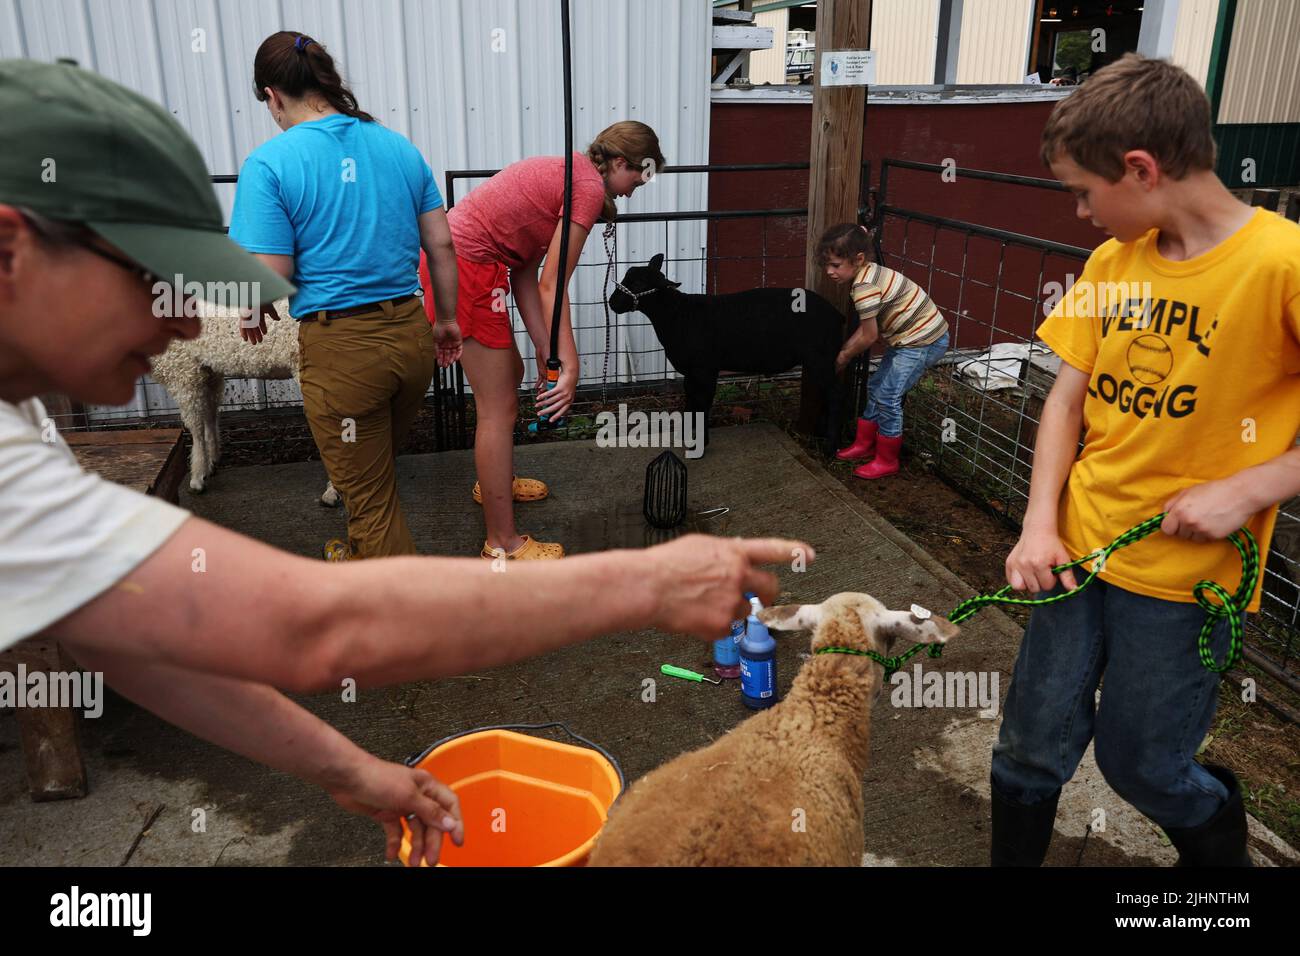 People clean livestock in a washing area at the 2022 Saratoga County Fair in Ballston Spa, New York, U.S., July 19, 2022. REUTERS/Shannon Stapleton Stock Photo